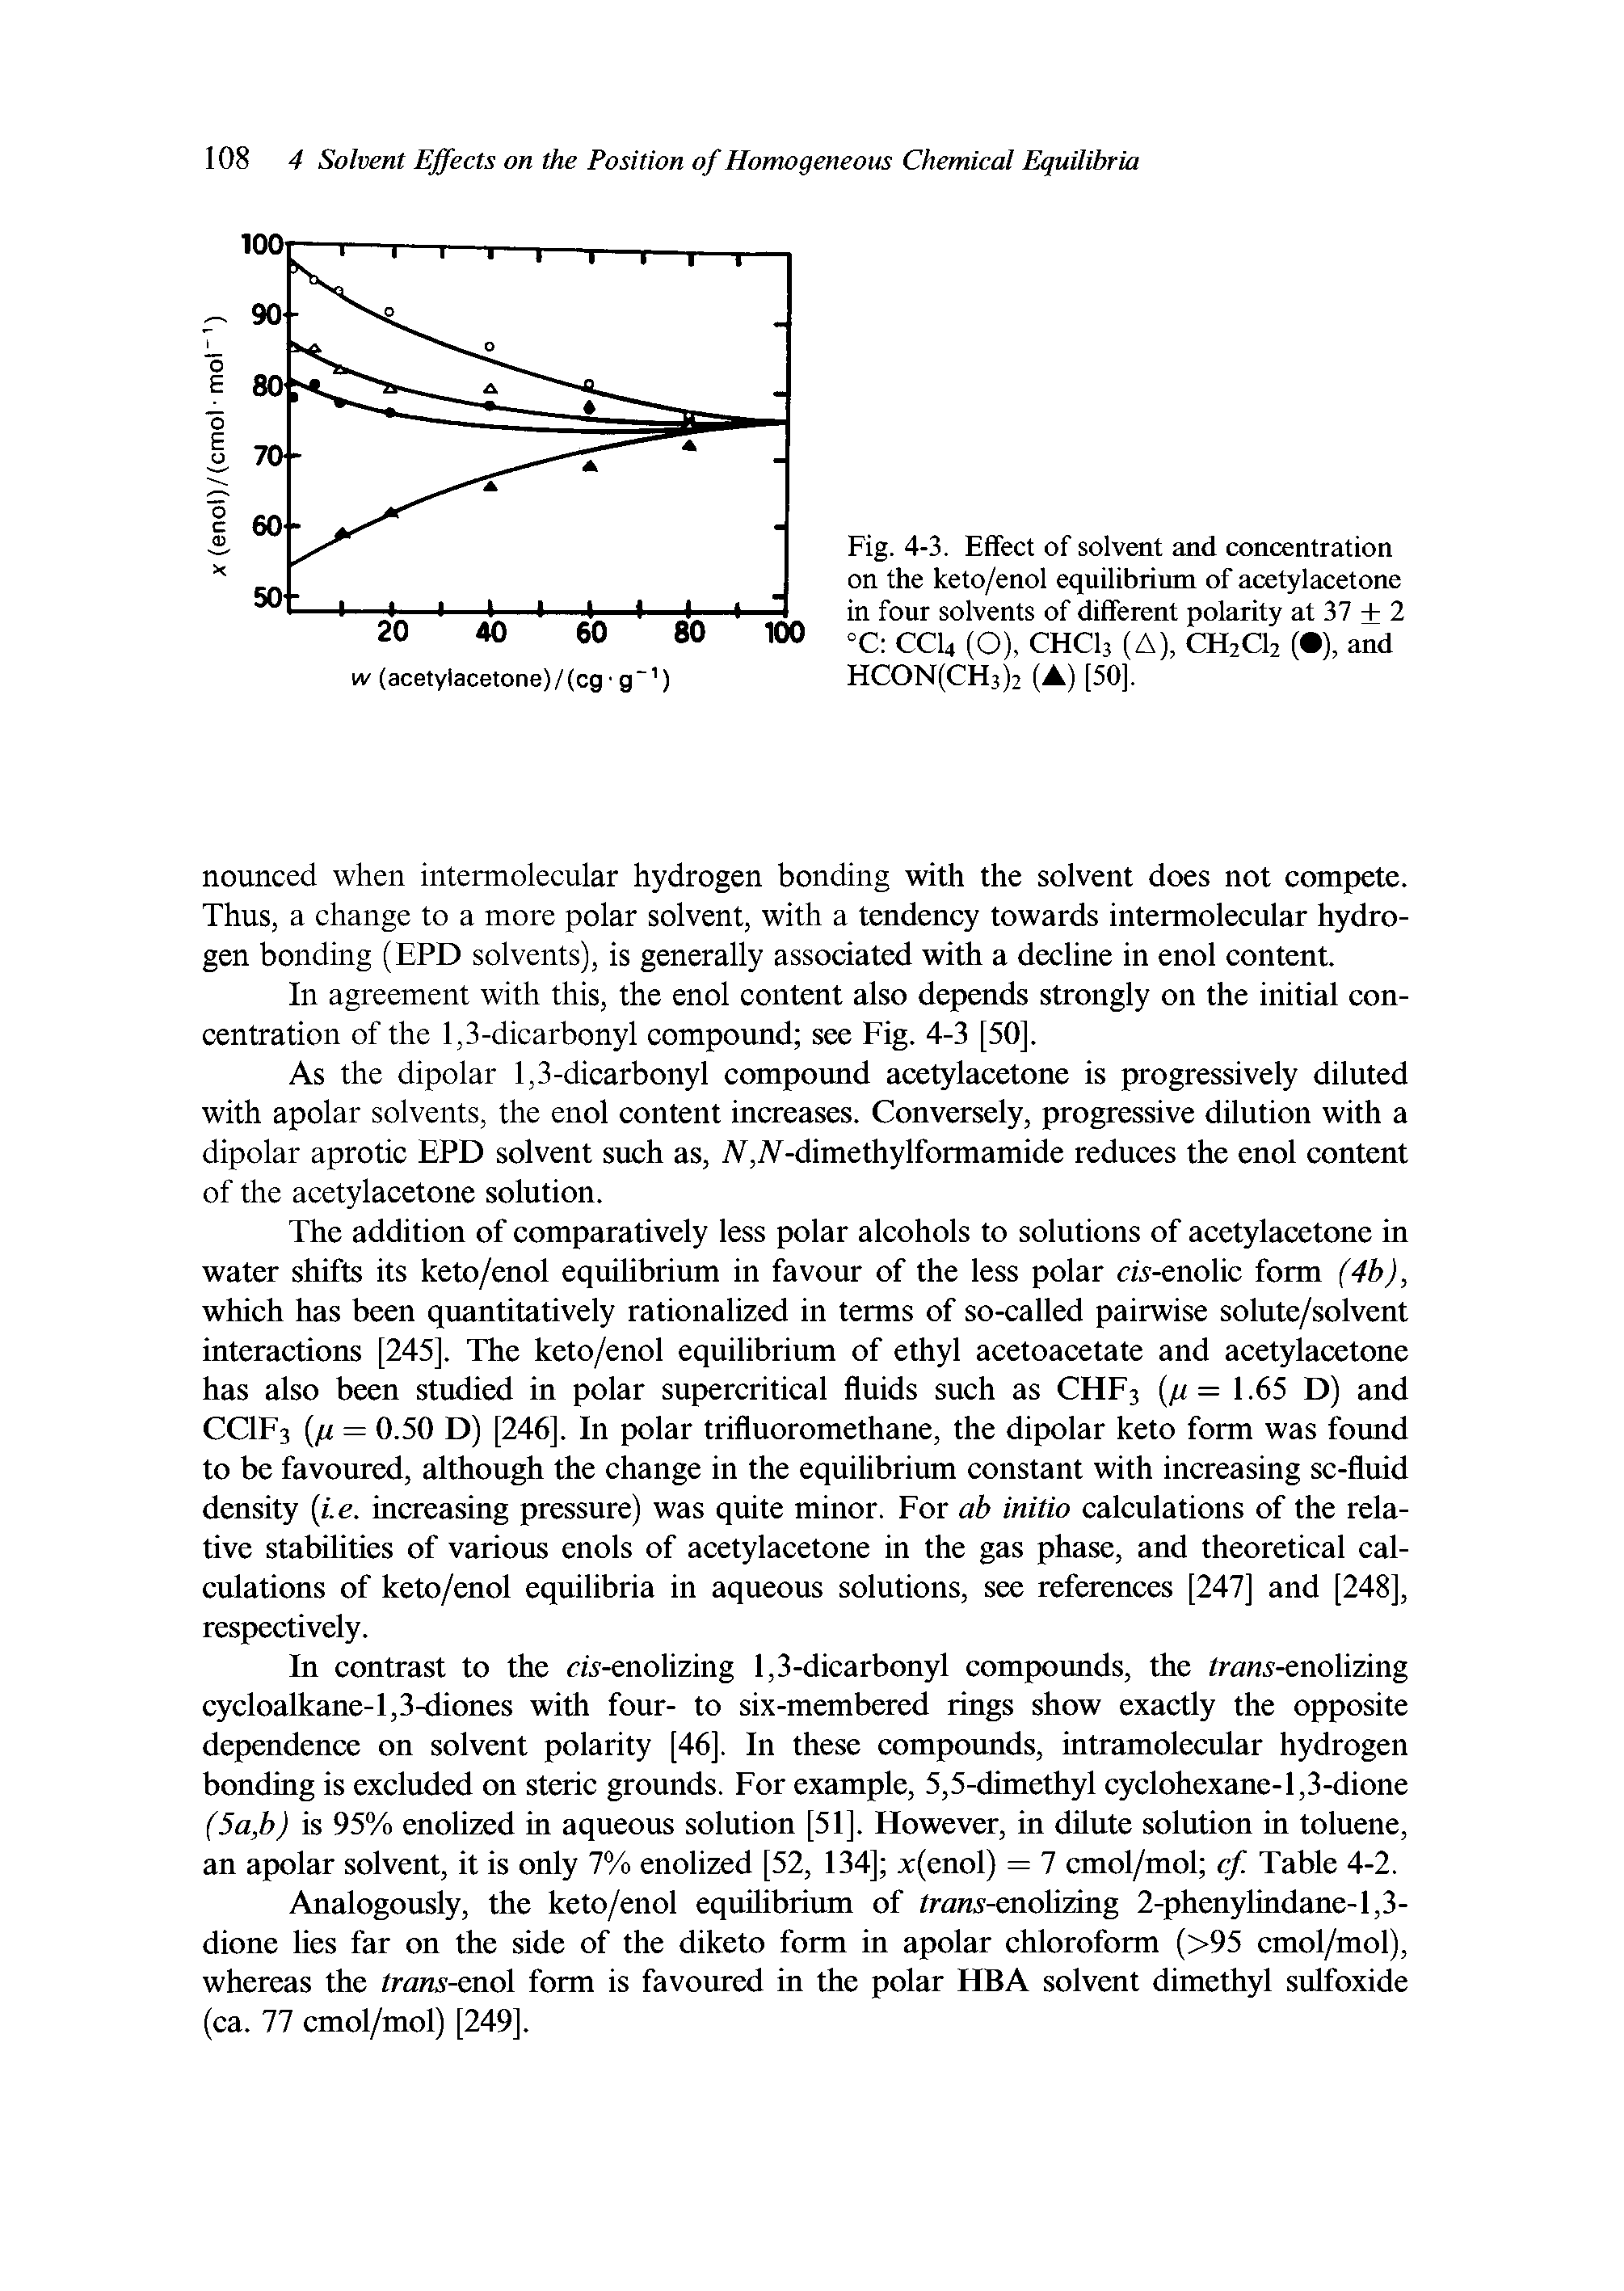 Fig. 4-3. Effect of solvent and concentration on the keto/enol equilibrium of acetylacetone in four solvents of different polarity at 37 + 2 °C ecu (O), CHCU (A), CHzCU ( ), and HC0N(CH3)2 (A) [50].